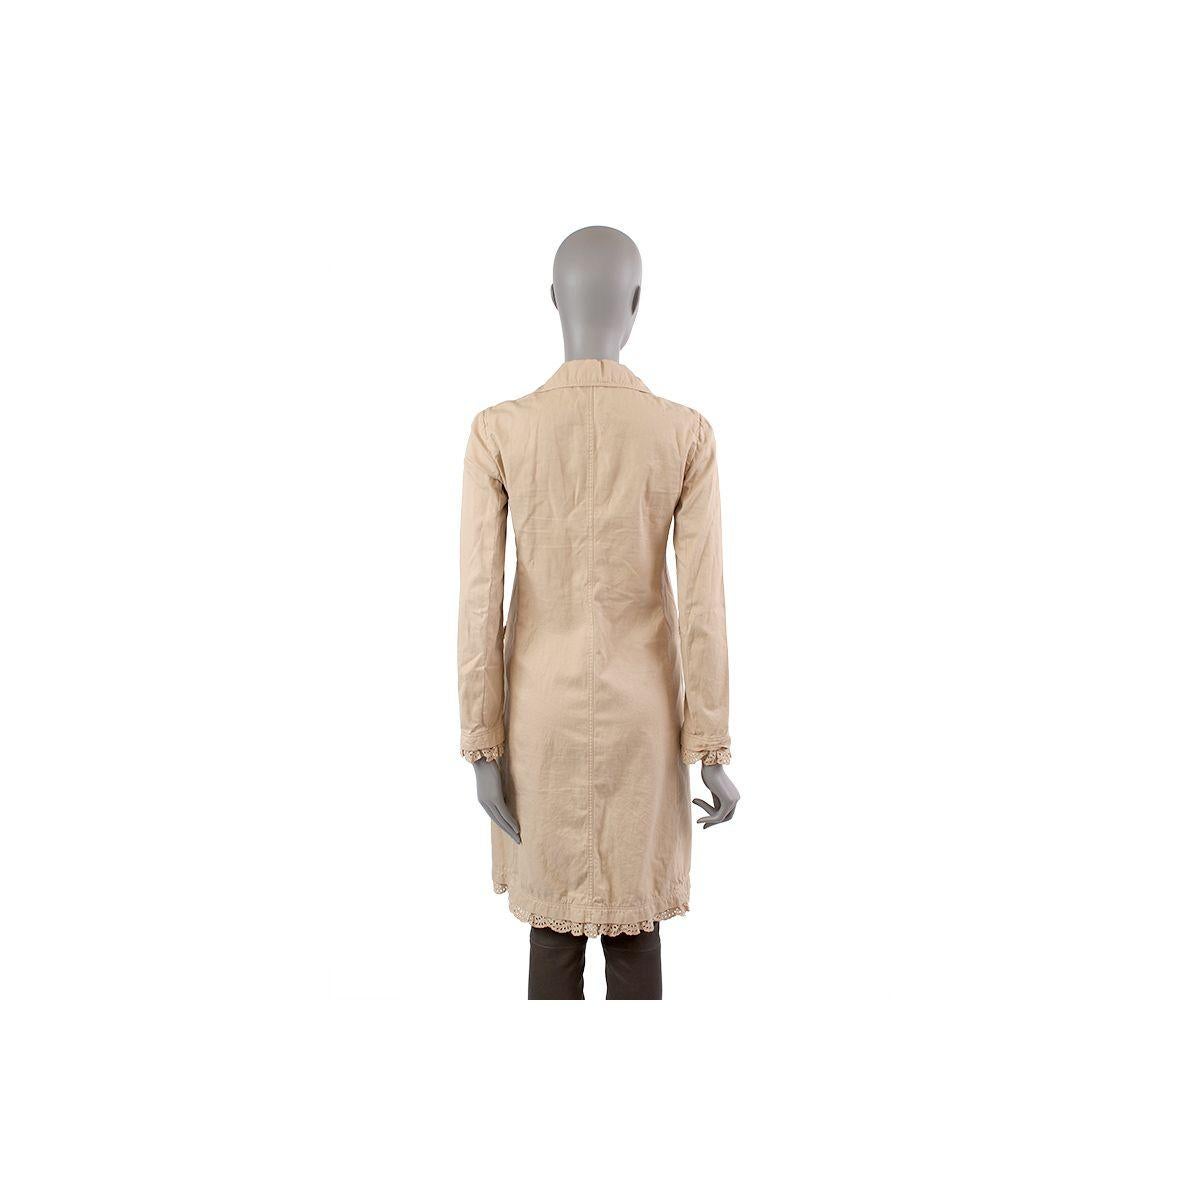 100% authentic Miu Miu between-seasons coat in beige cotton (100%). With two pockets on the front. Opens with buttons on the front. Has been worn and is in excellent condition.

Measurements
Tag Size	38
Size	XS
Shoulder Width	39cm (15.2in)
Bust